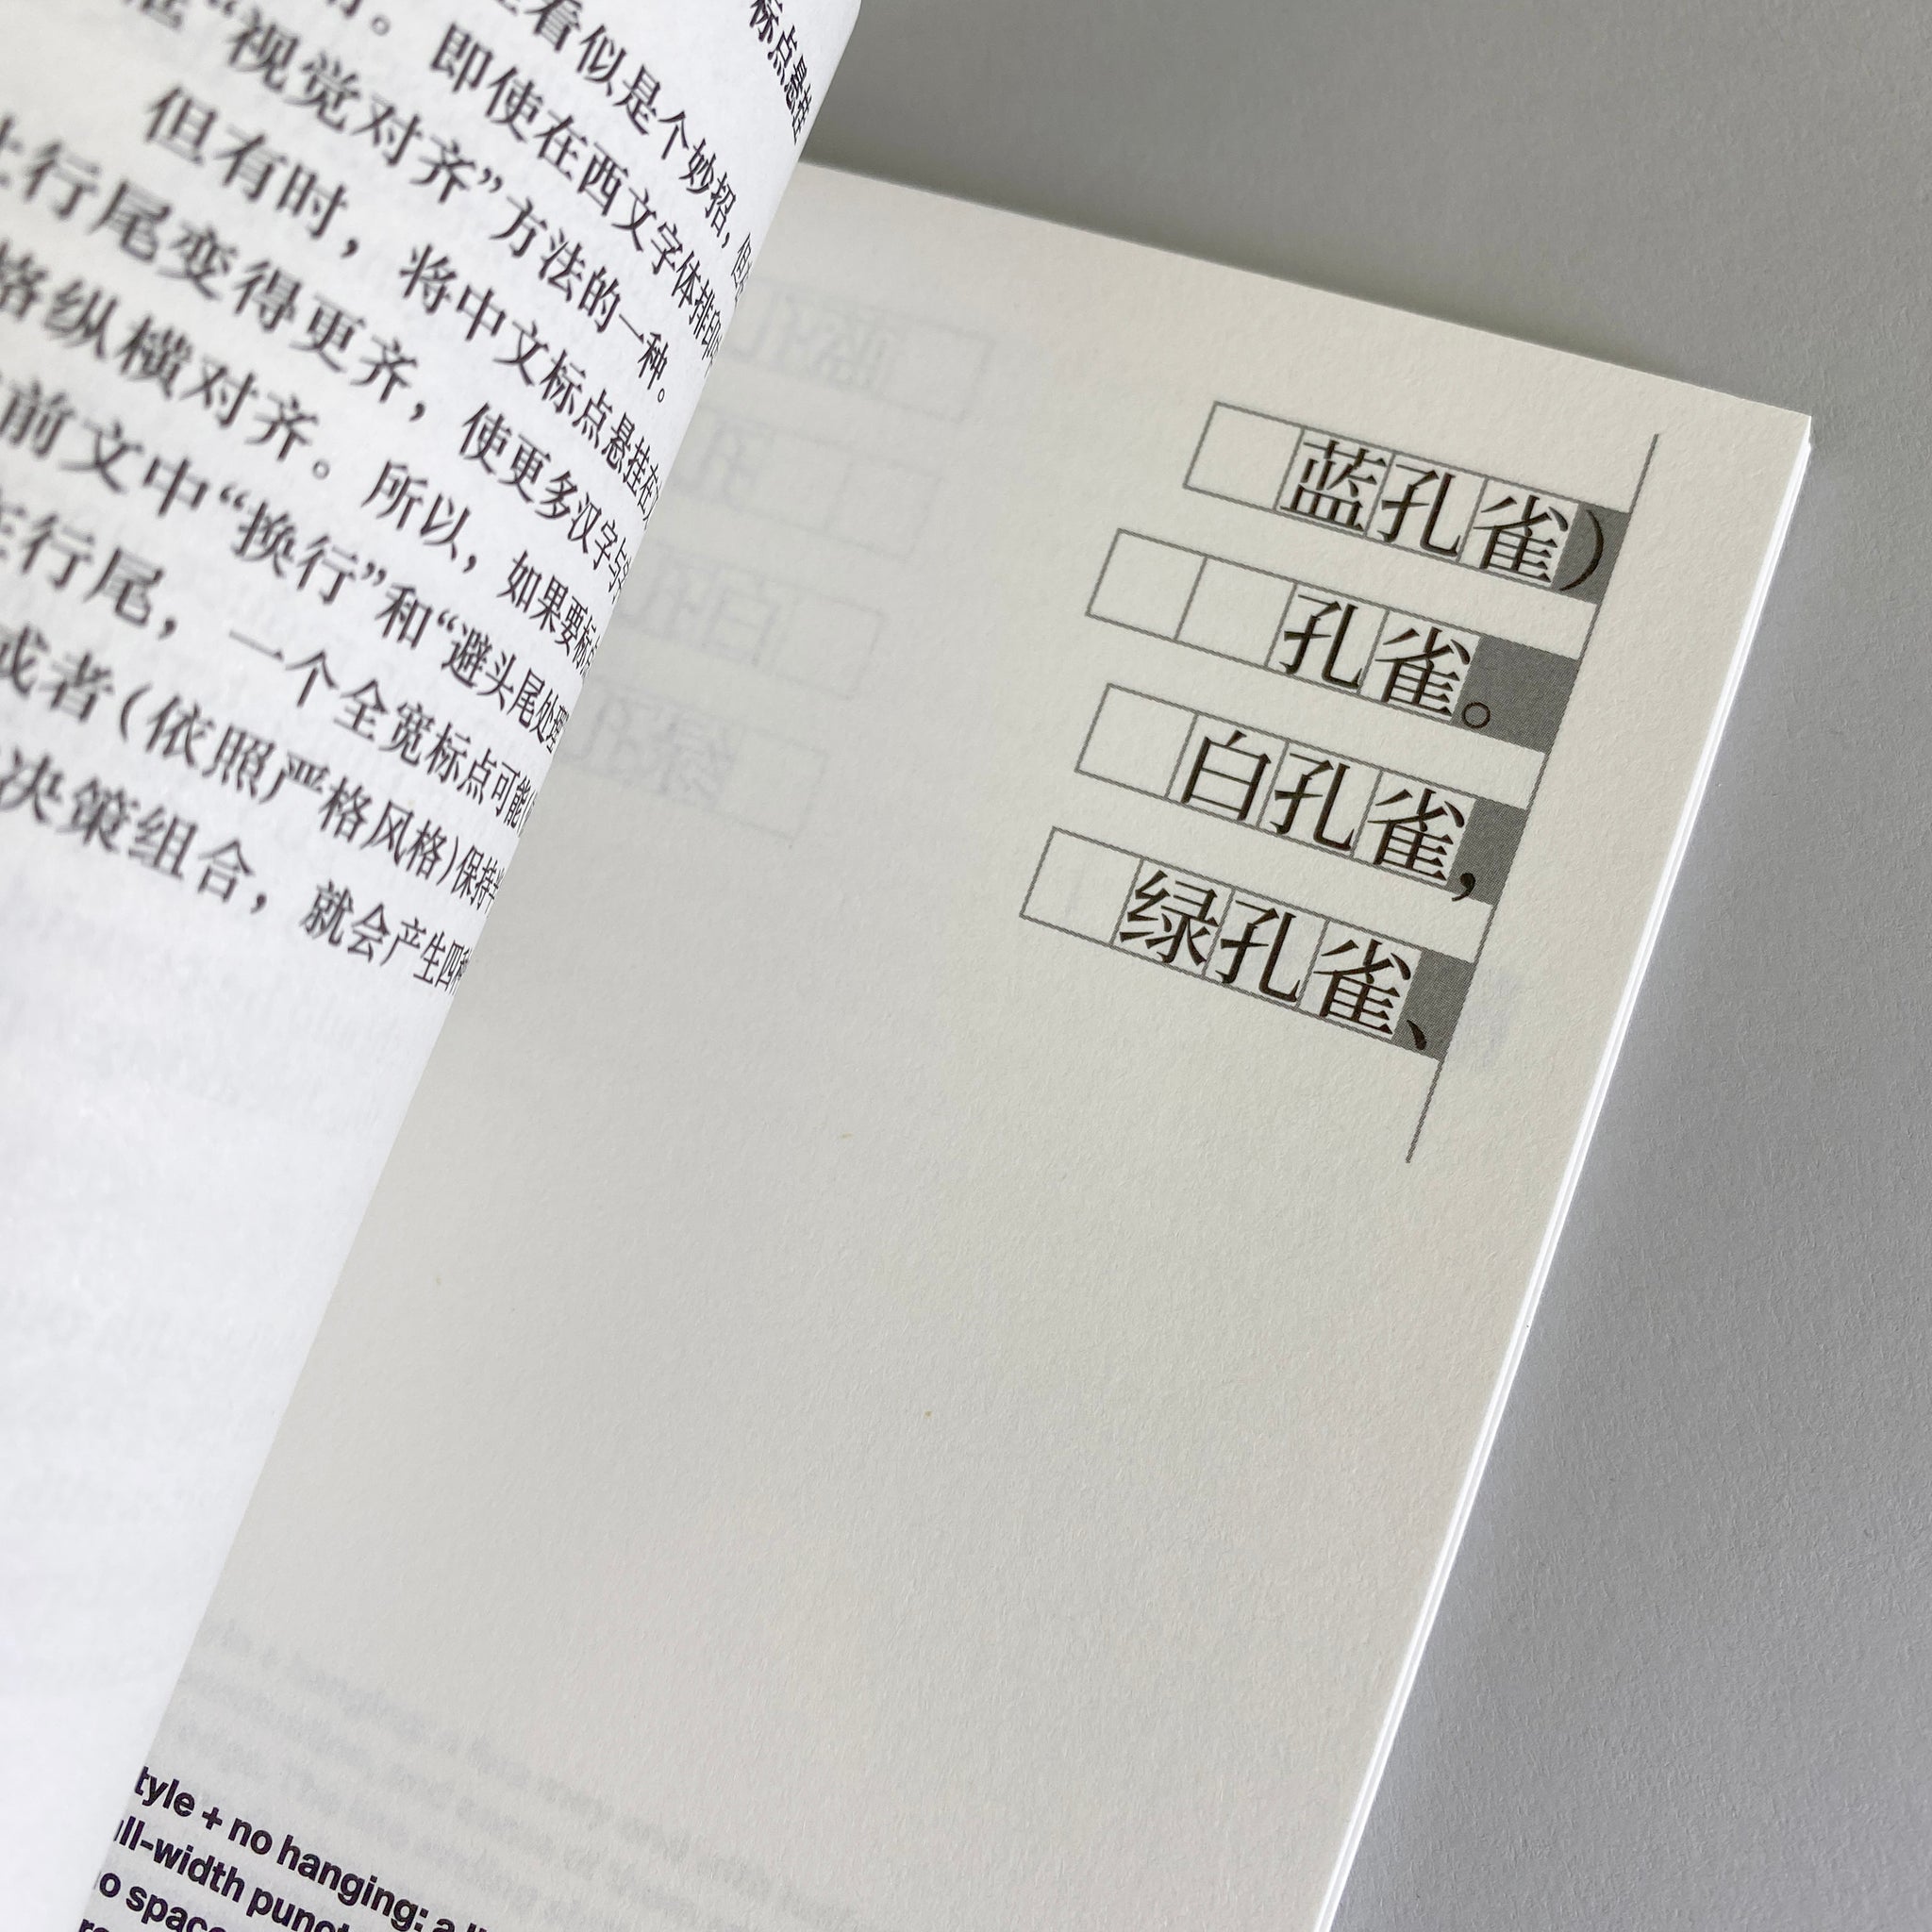 Collection of Research on Chinese Typography (中文文字设计研究选集)